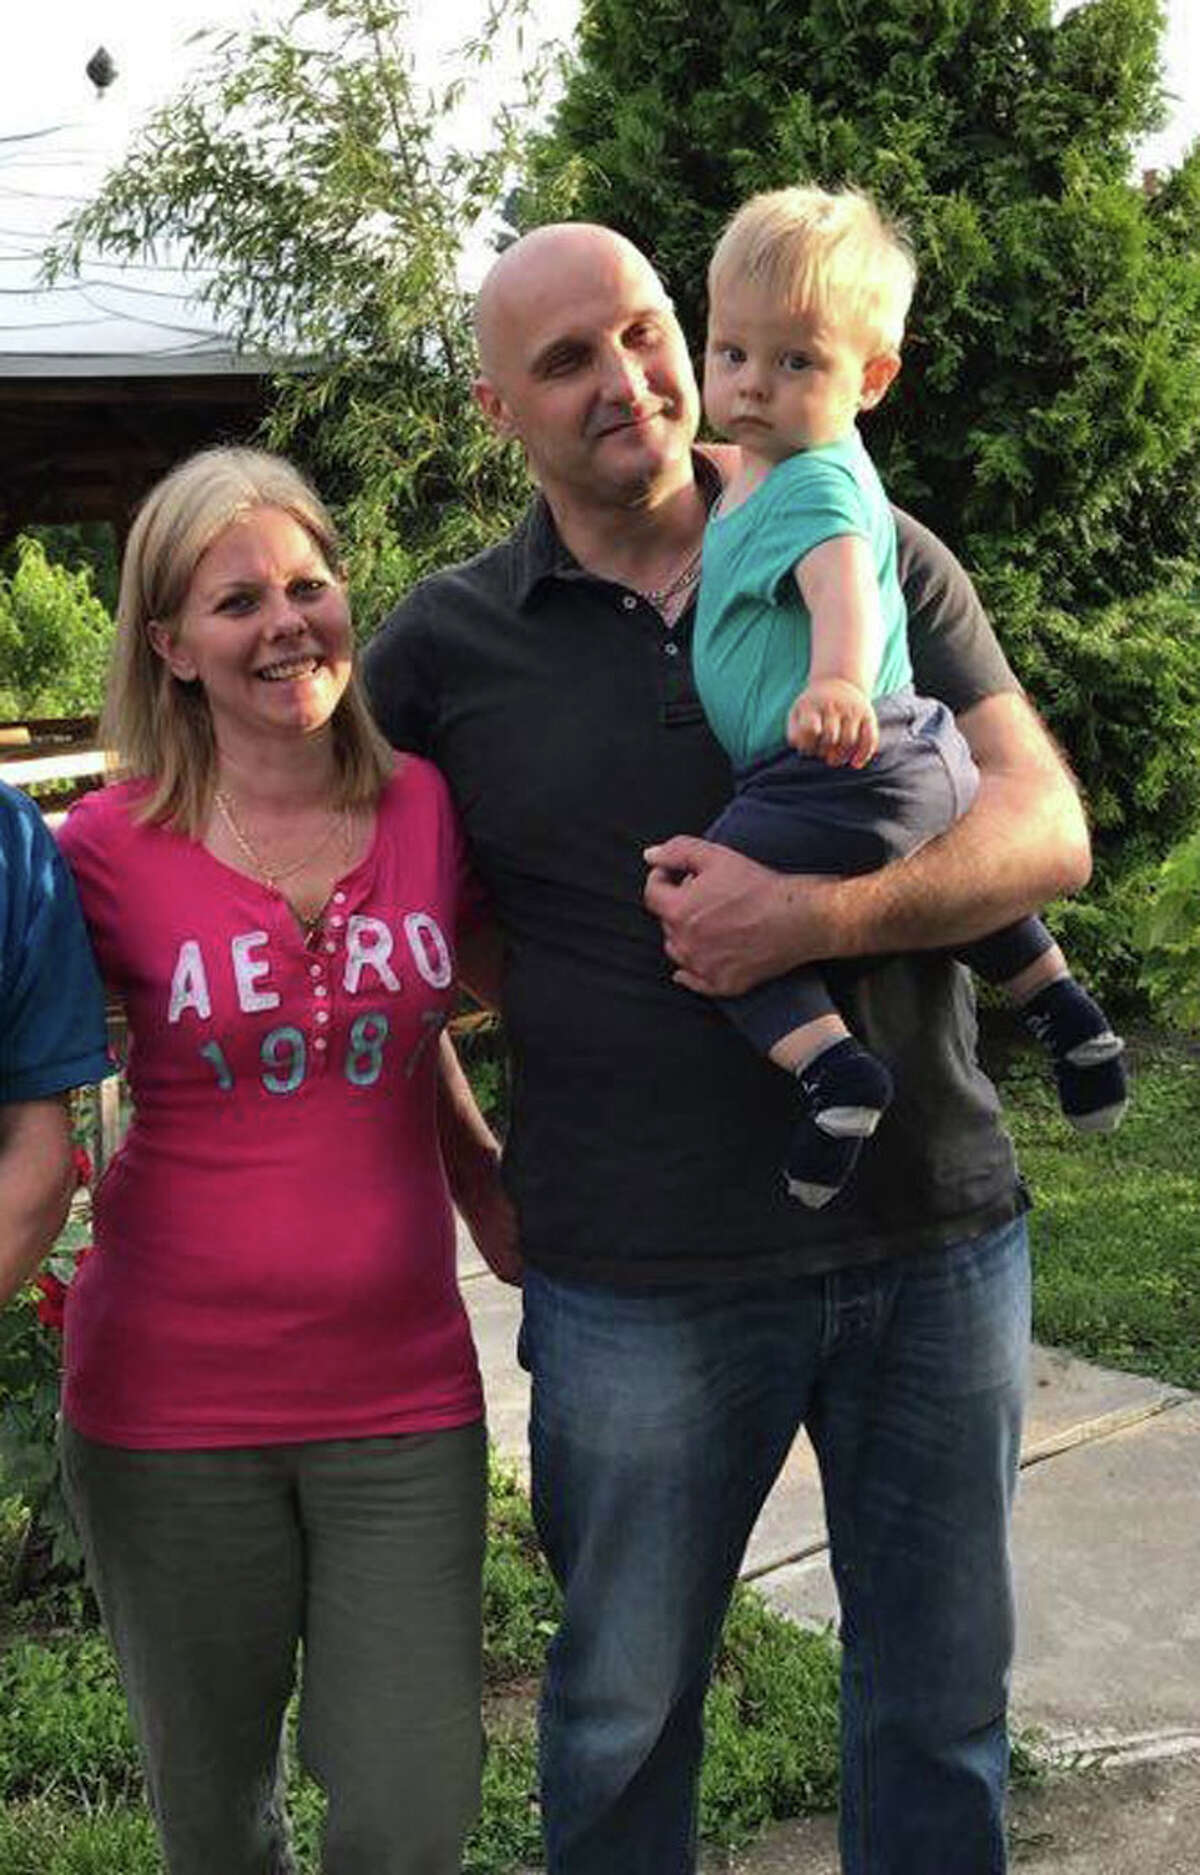 Regina Zsigmond, 42, left, and Laszlo Kovacs, 45, right, with their son, Levente Kovacs, 2. The two-year-old boy is currently being held in a Bronx shelter. (Provided photo)